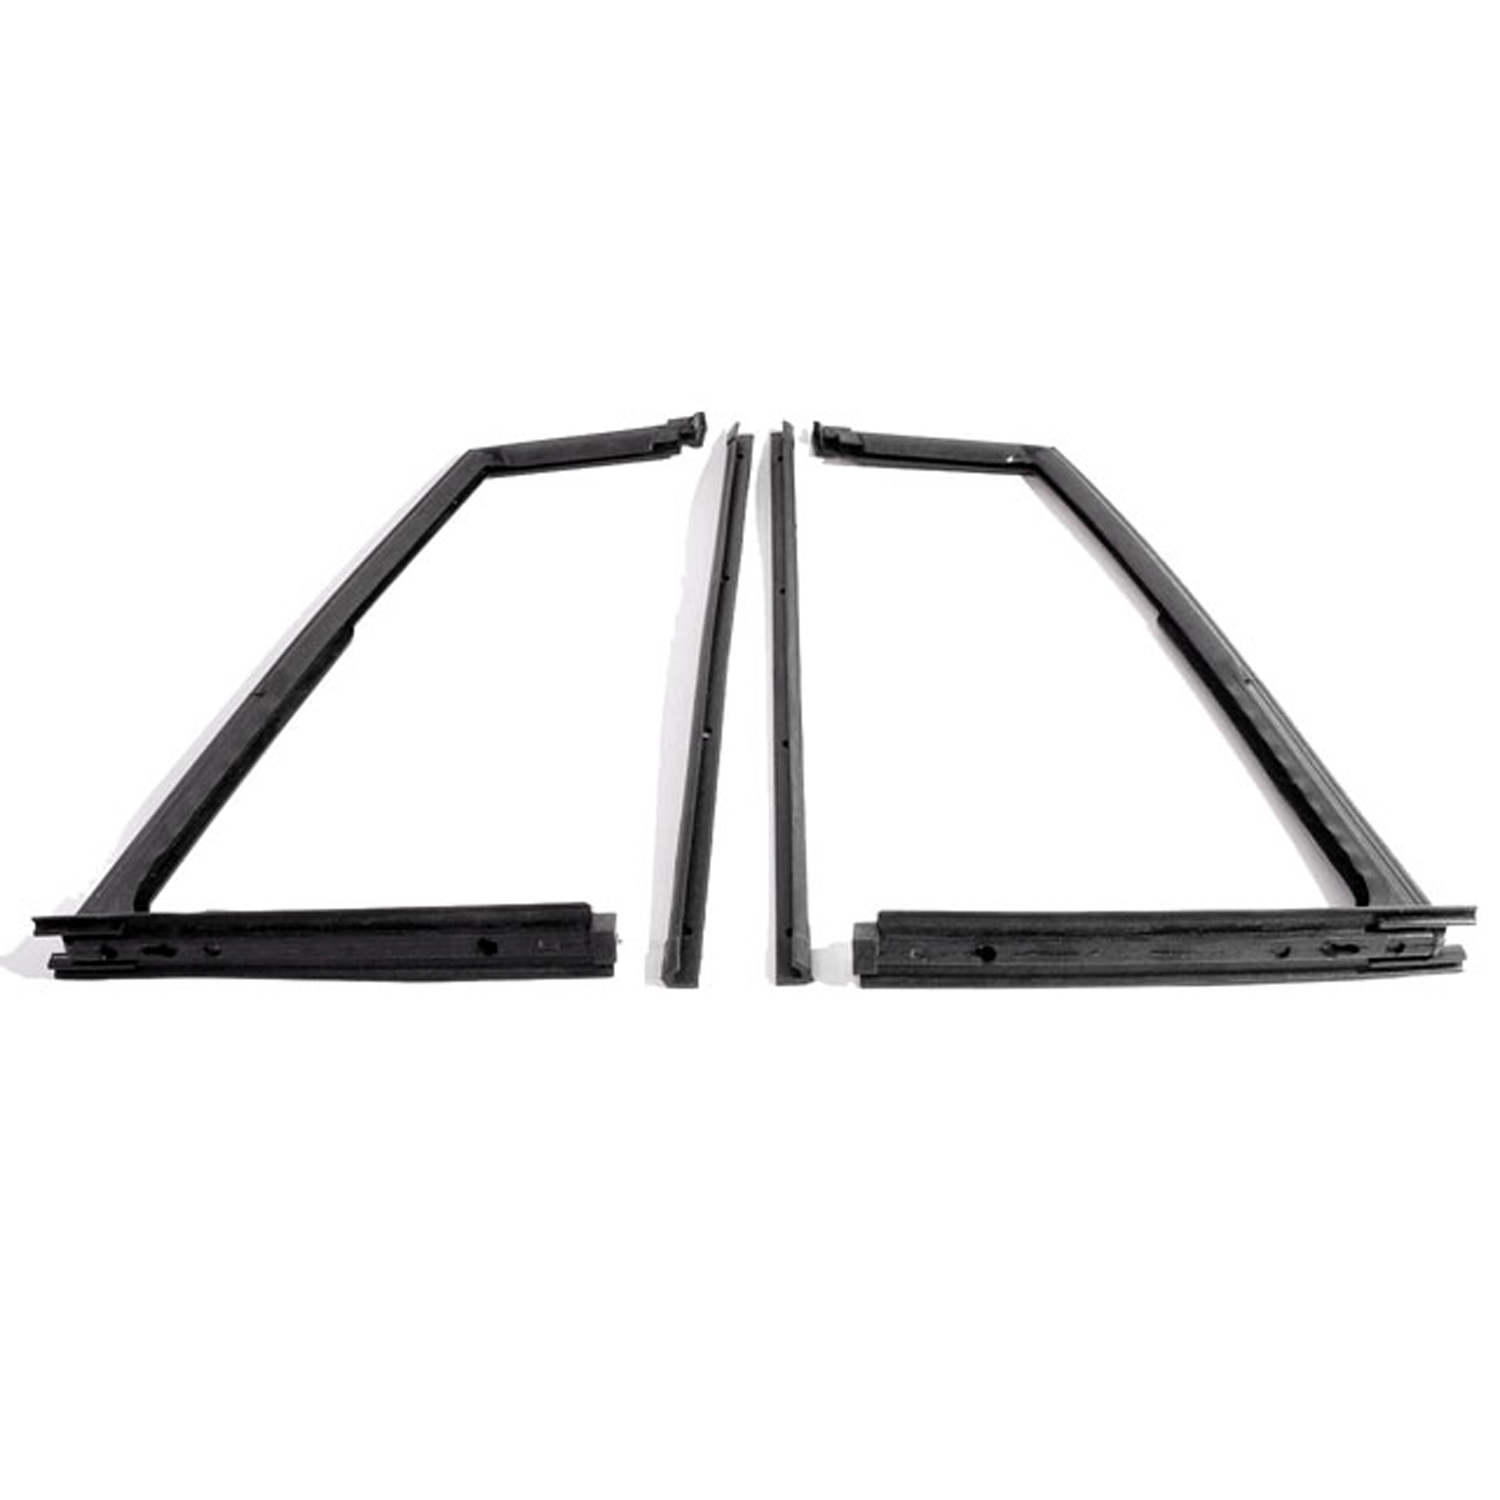 1970 Jeep Jeepster Vent Window Seals.  Pair-WR 9700